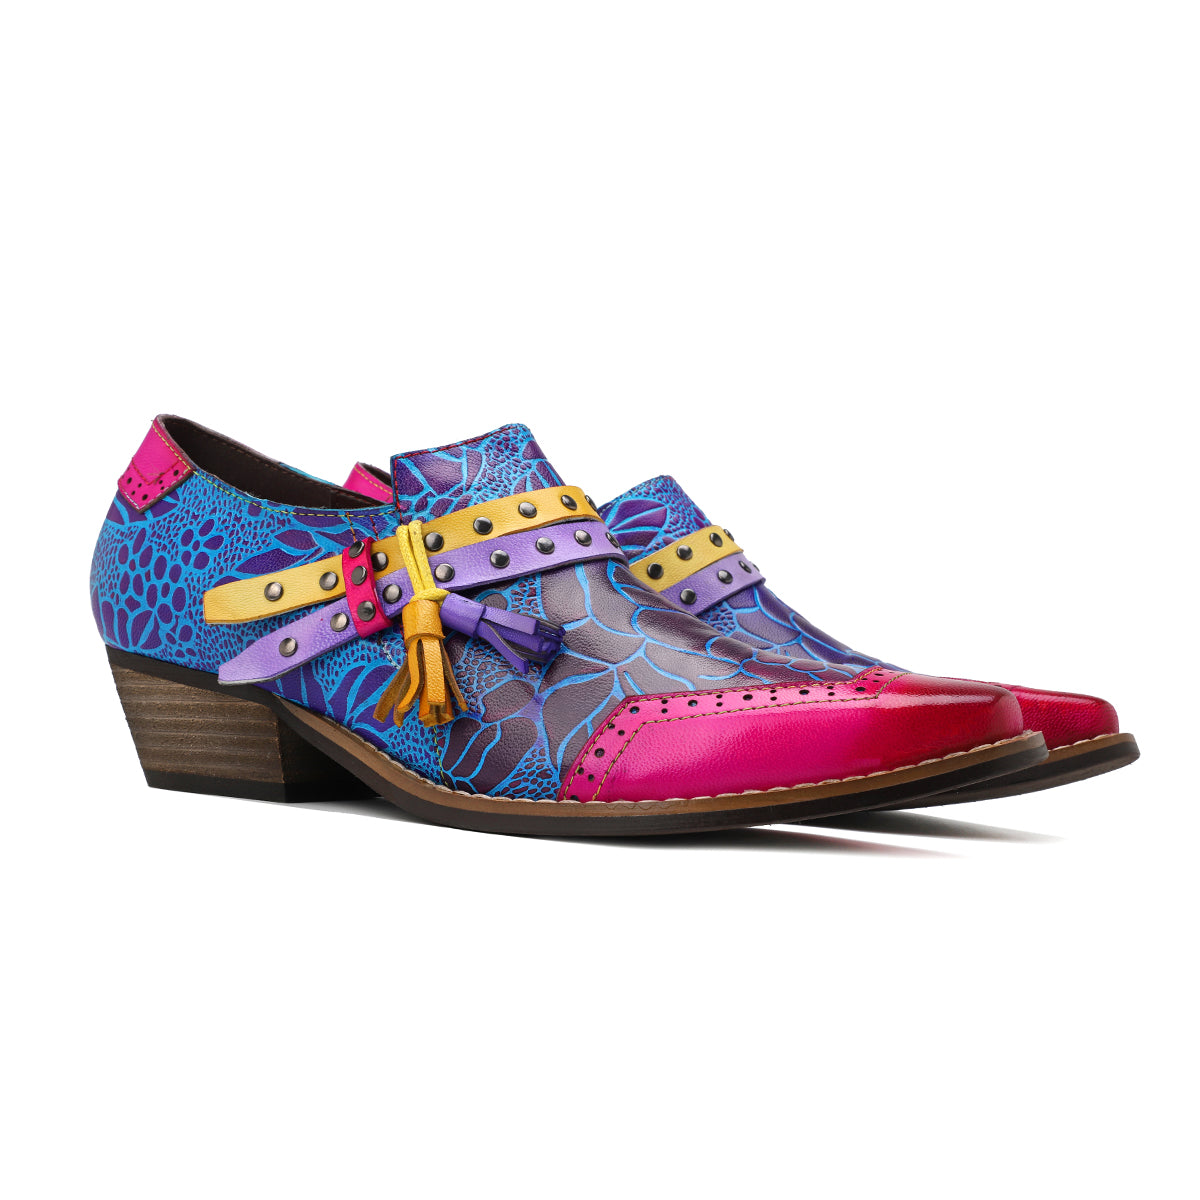 SOFFIA | Flower-Accent Genuine Leather Booties Oxford Shoes